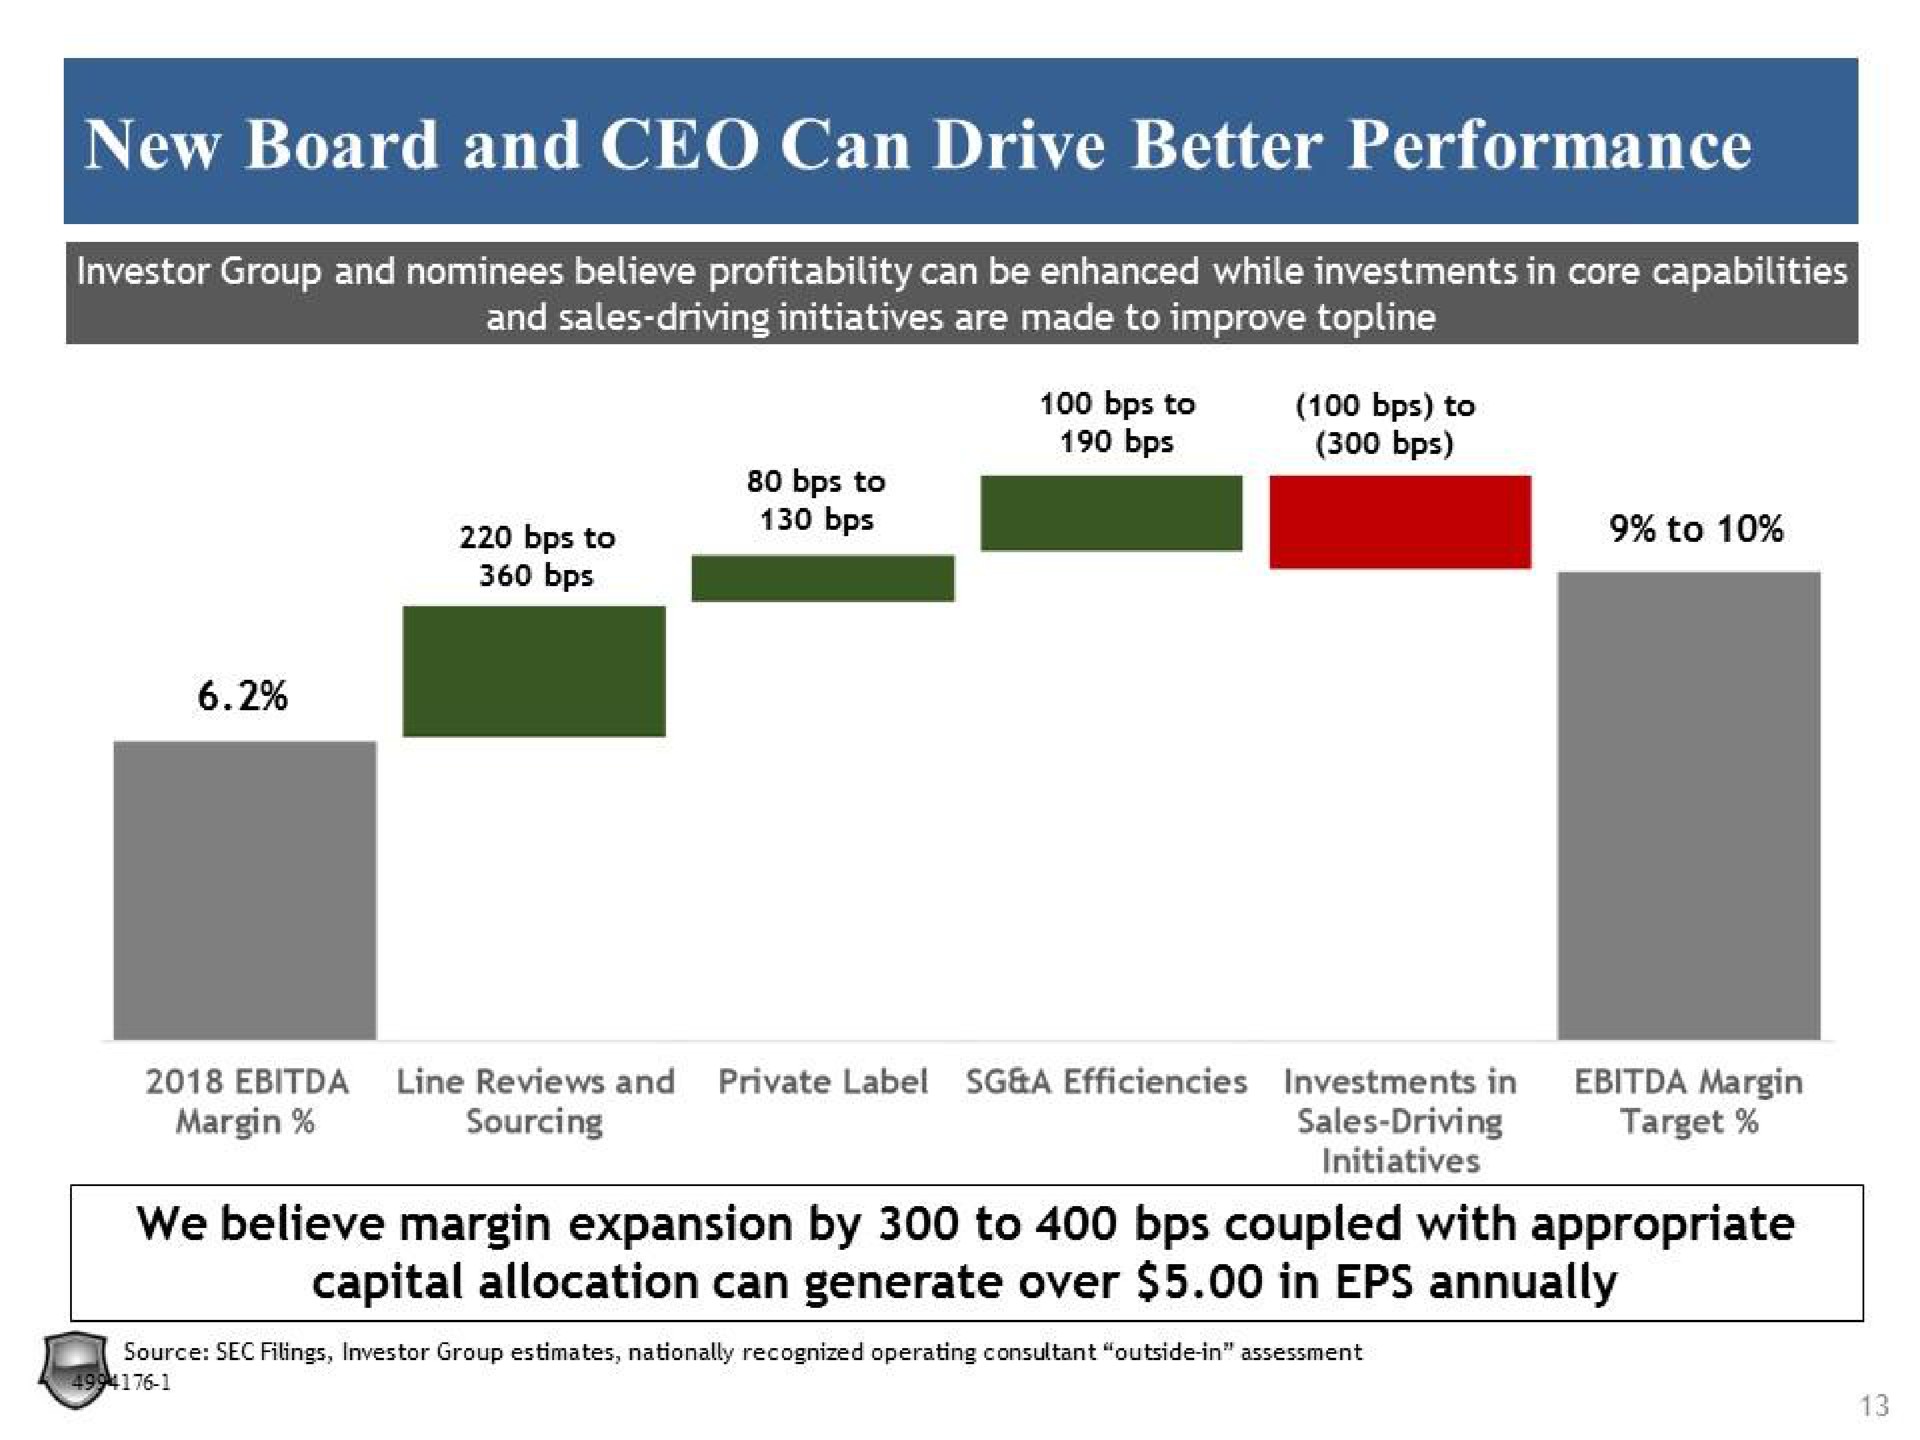 new board and can drive better performance we believe margin expansion by to coupled with appropriate capital allocation can generate over in annually | Legion Partners